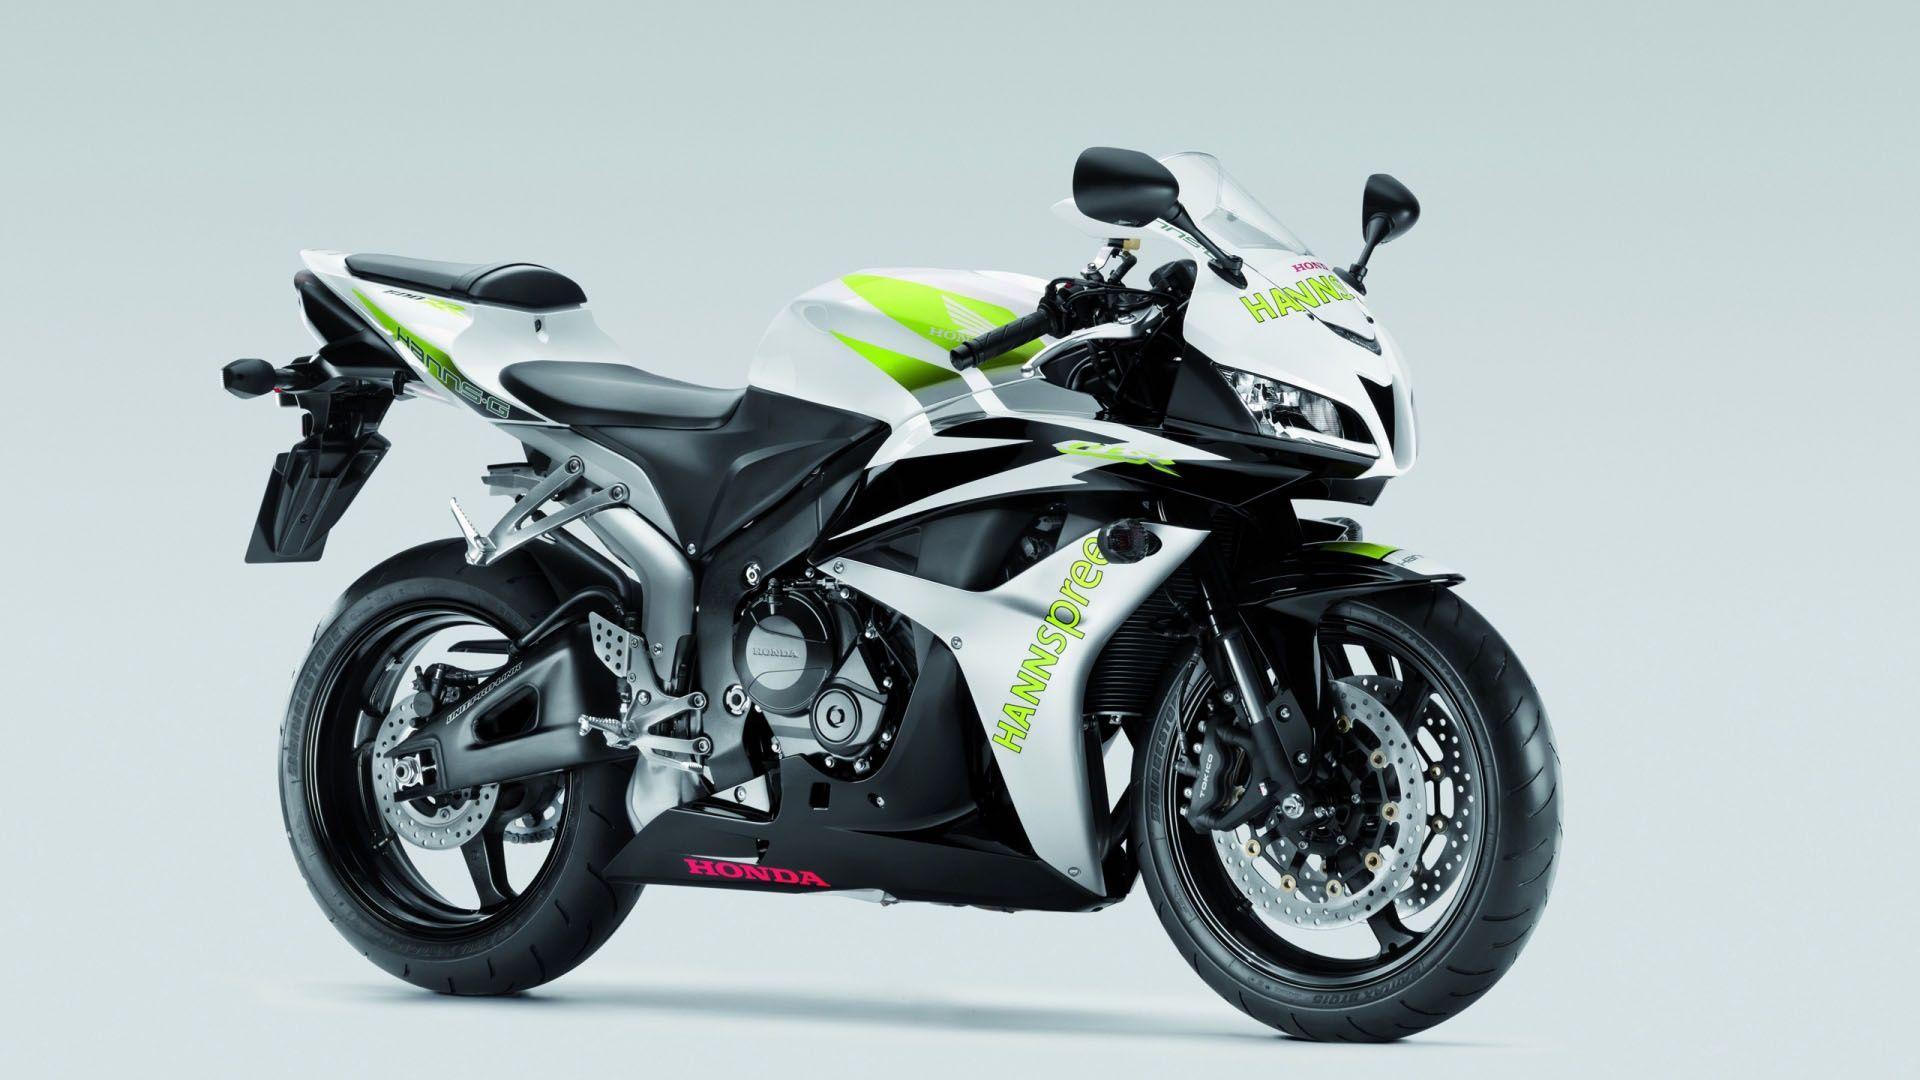 Honda hanns g wallpaper and image, picture, photo